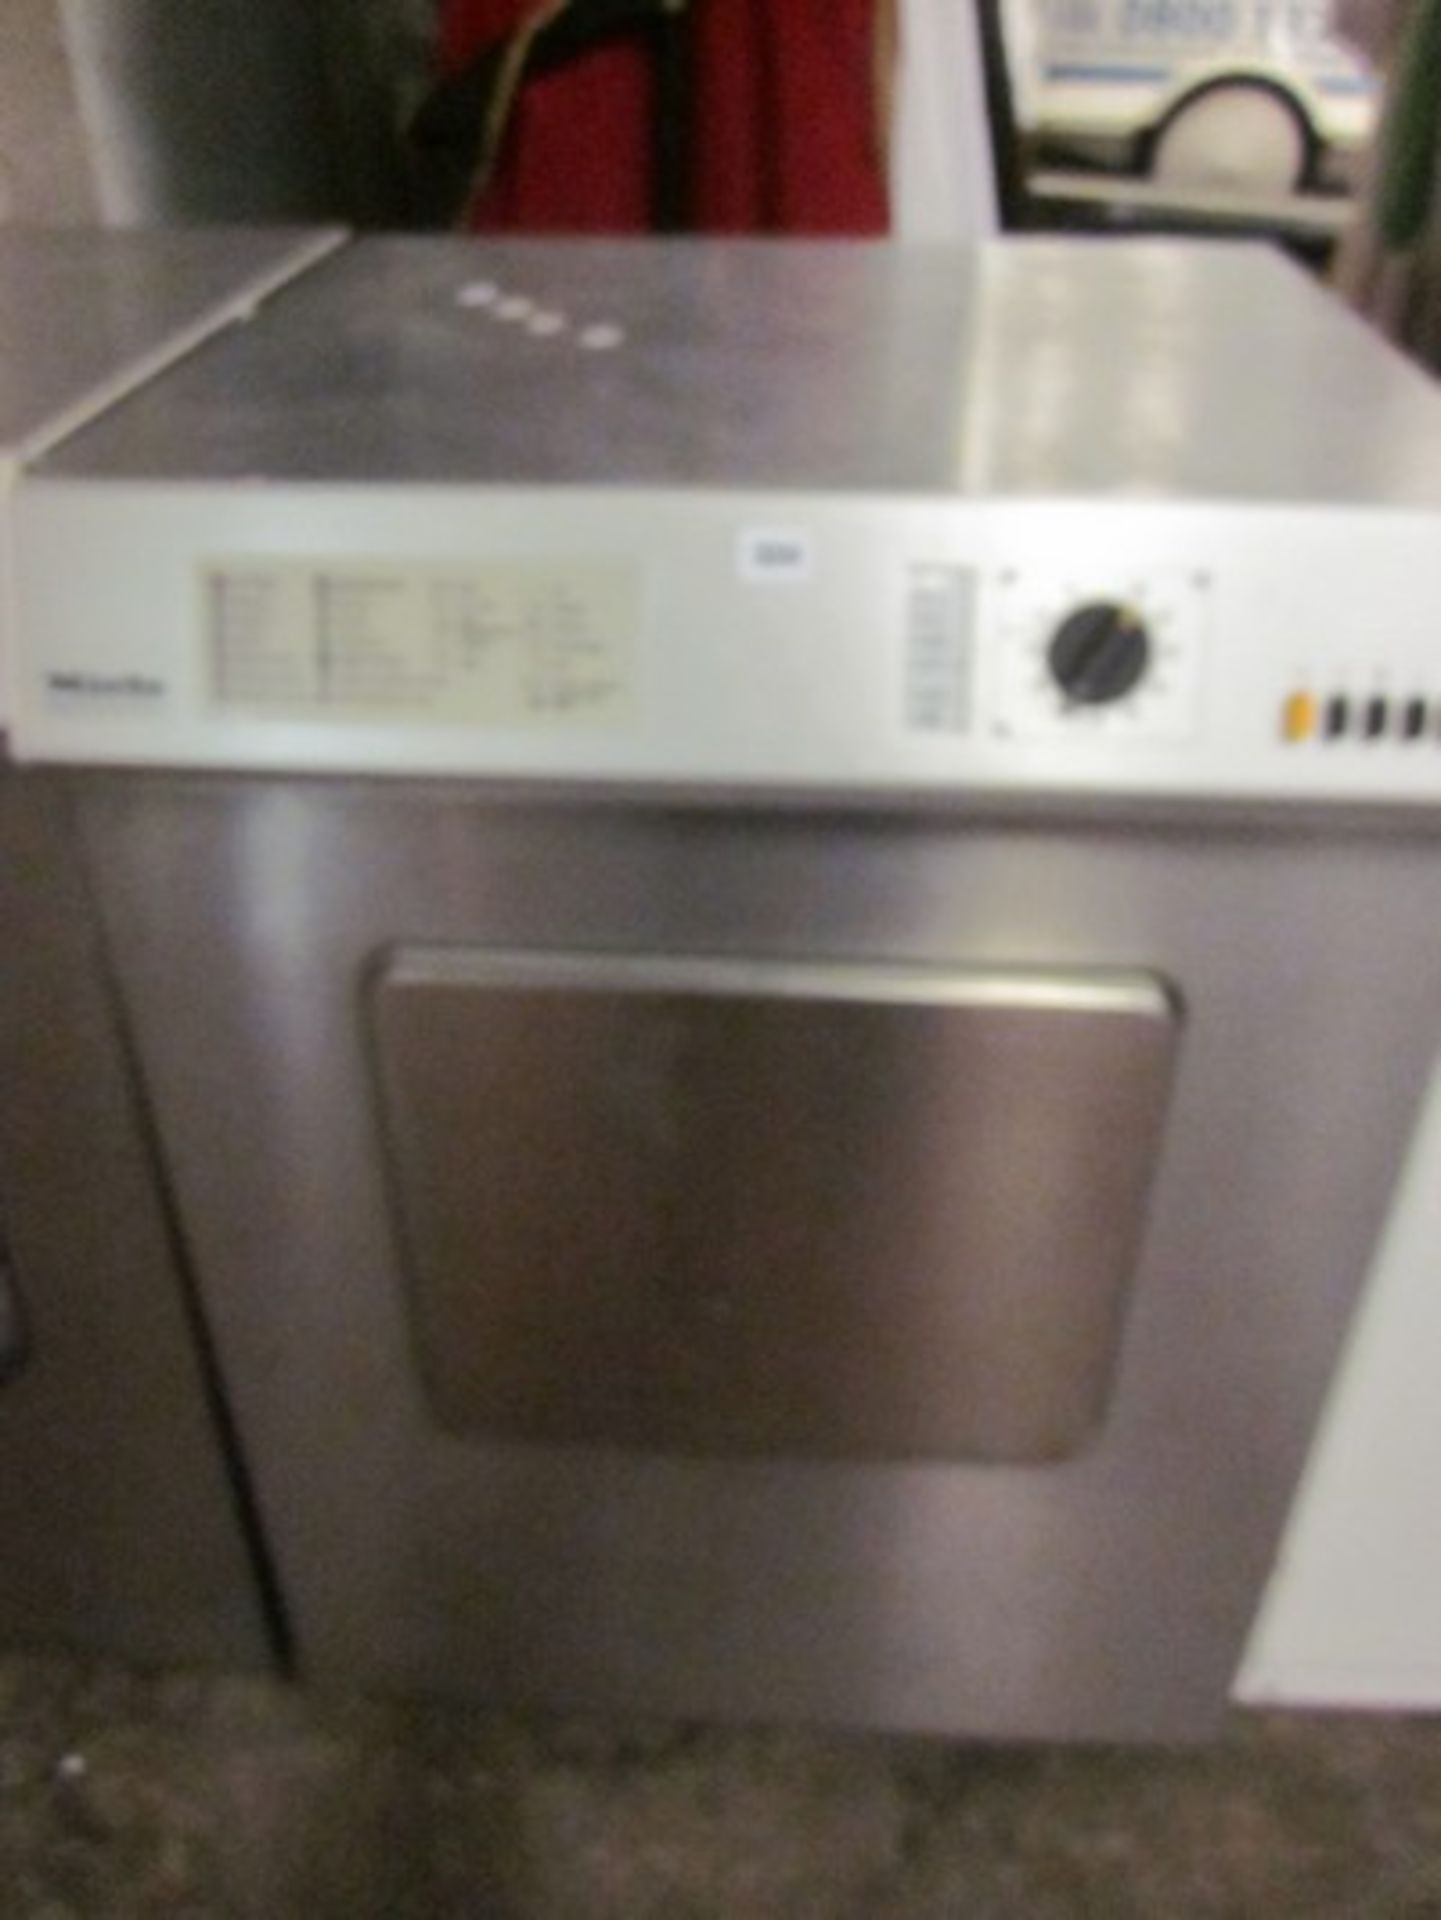 A Miele Professional dryer (3 phase).